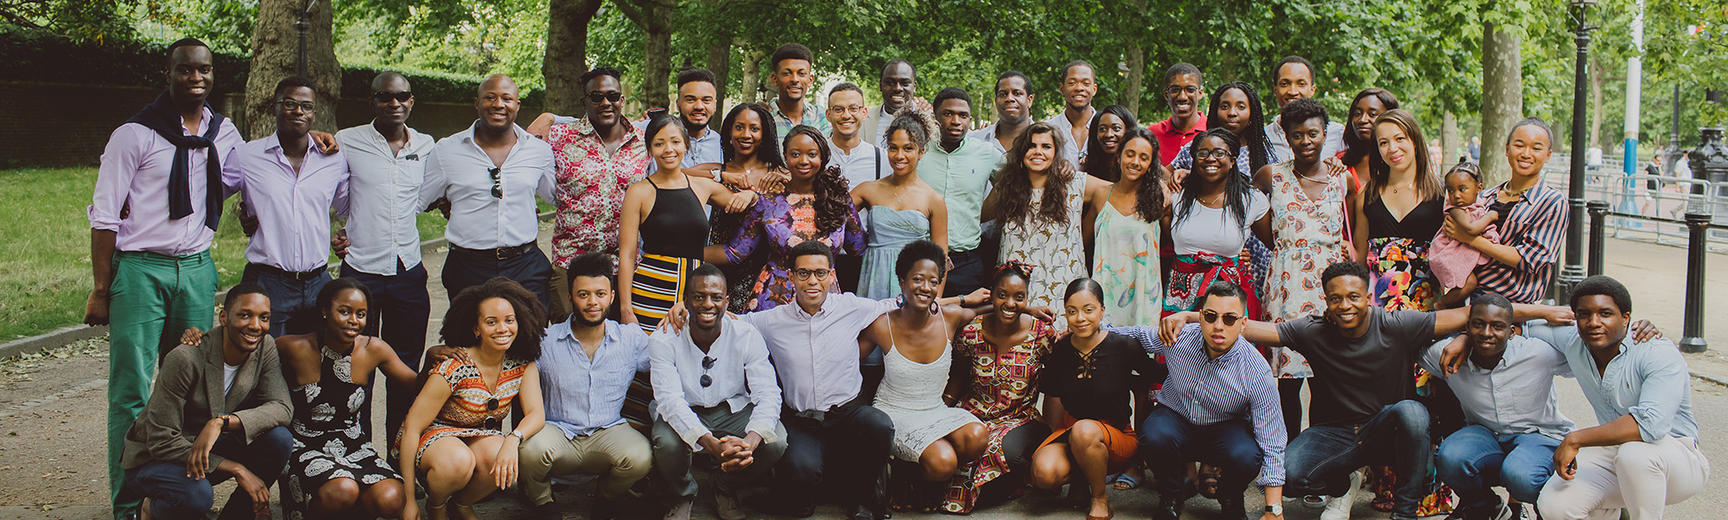 A group picture of the member of the Oxford Black Alumni Network